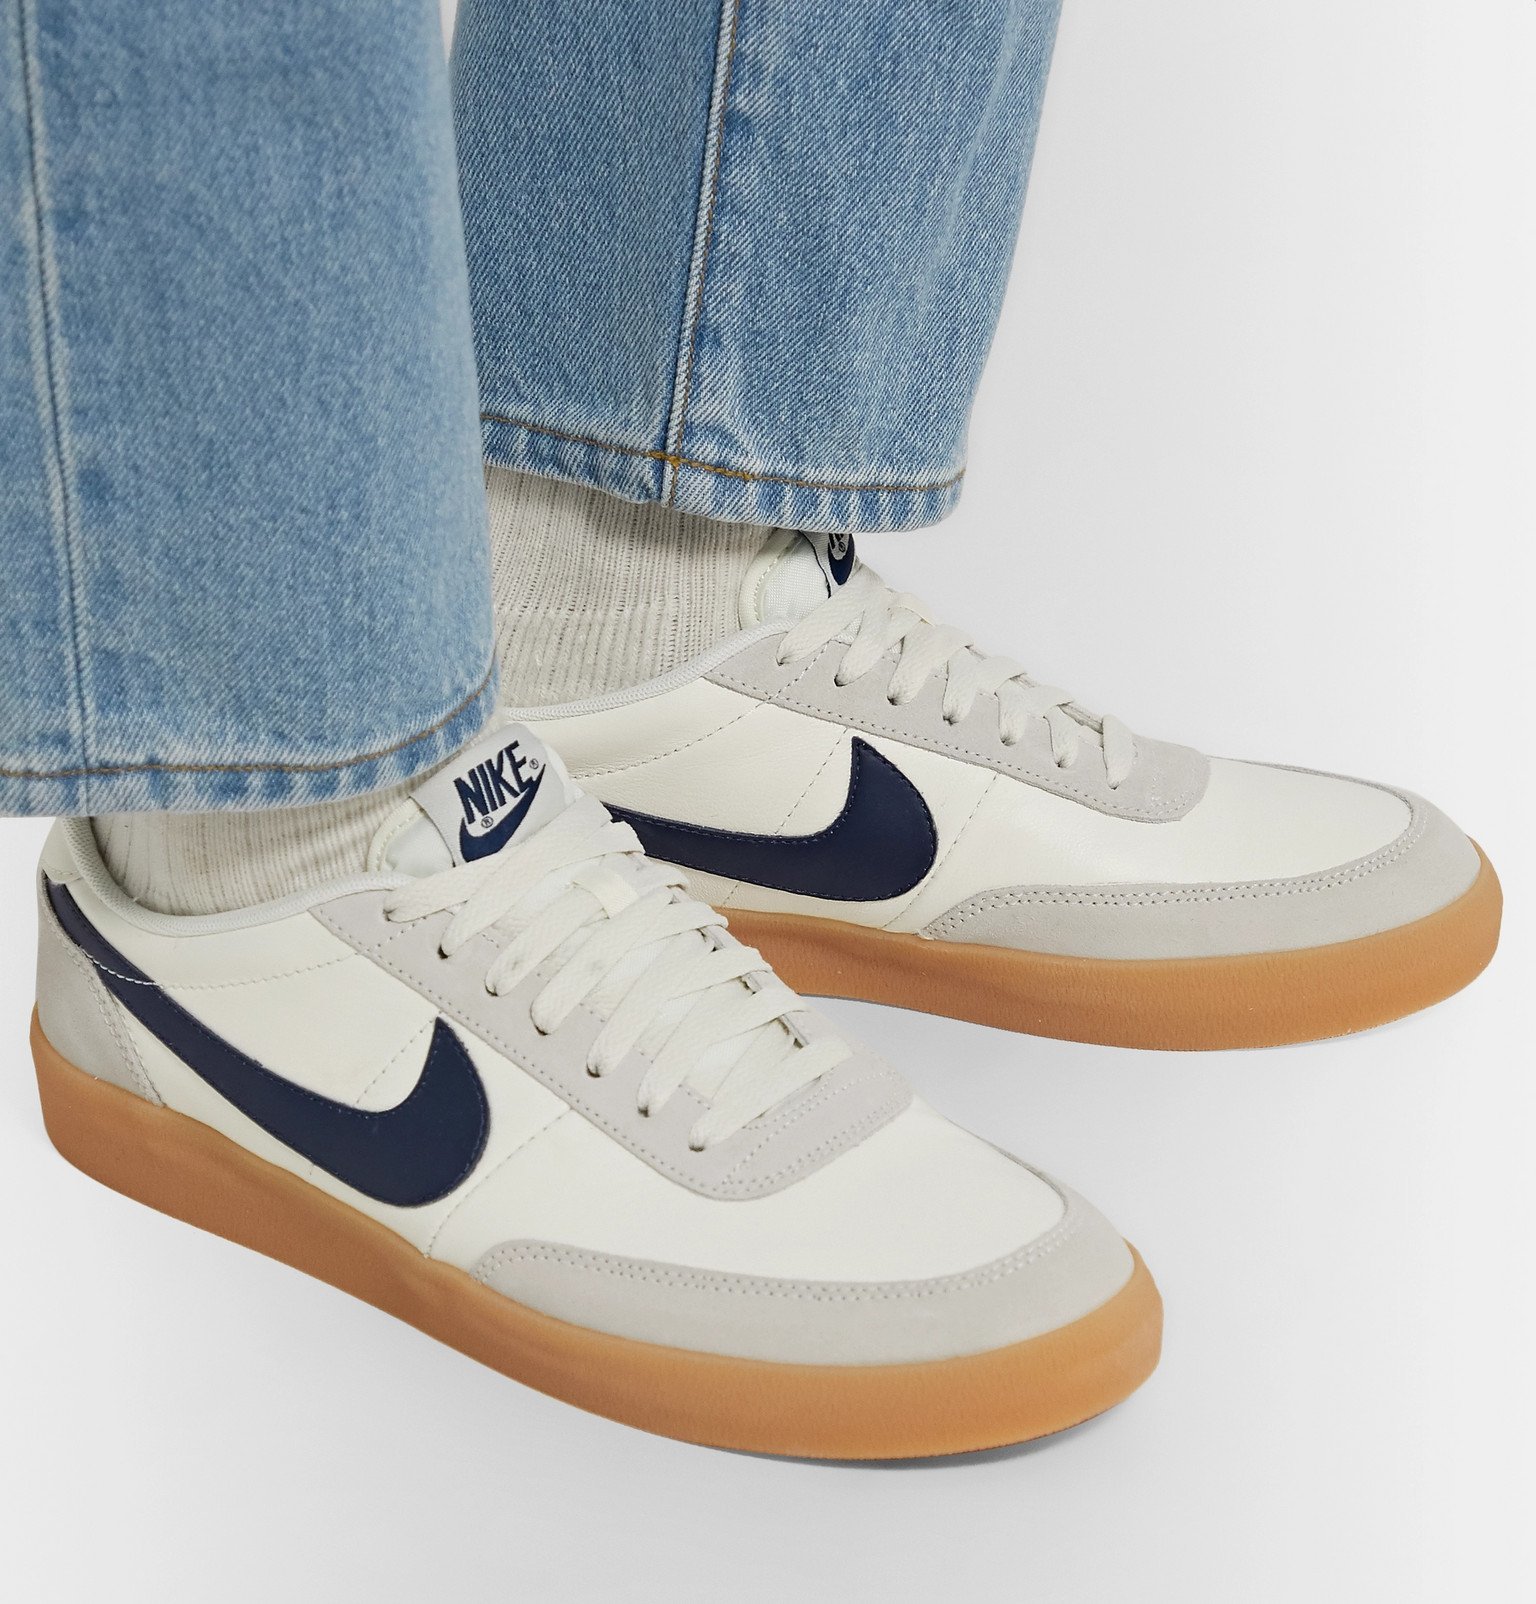 killshot 2 leather and suede sneakers